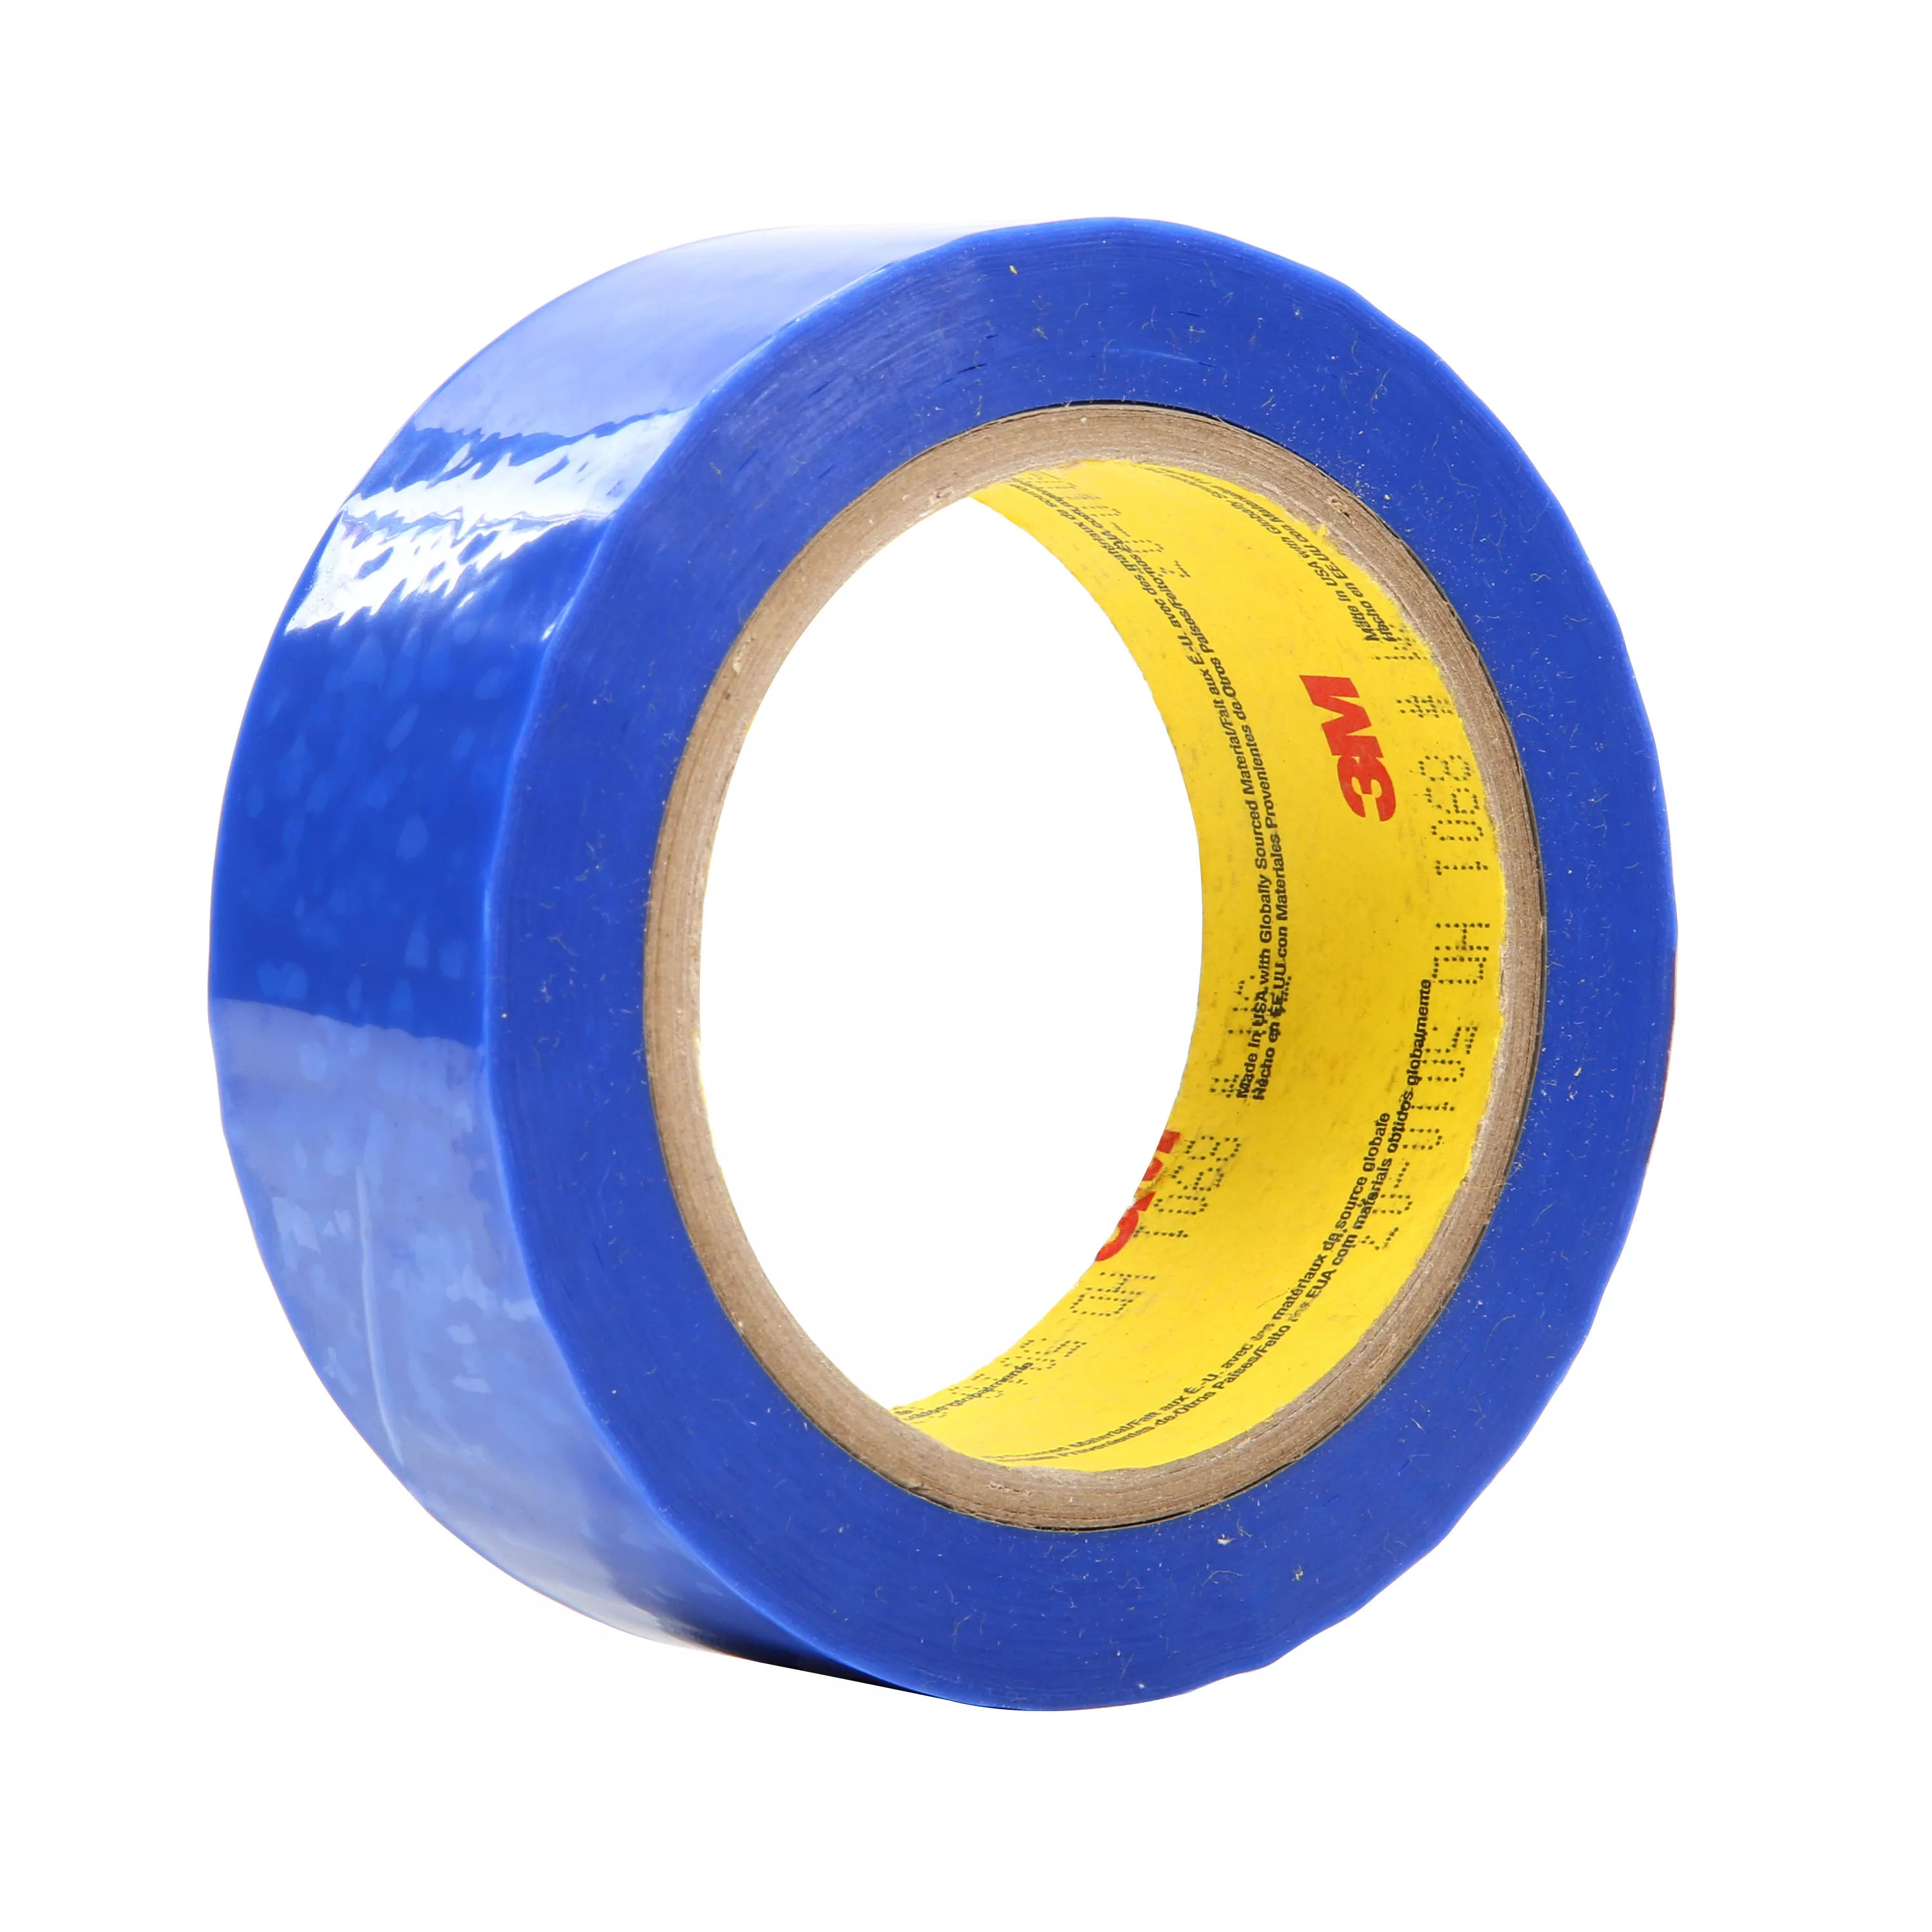 3M™ Polyester Tape 8901, Blue, 1 1/2 in x 72 yd, 0.9 mil, 32 Rolls/Case